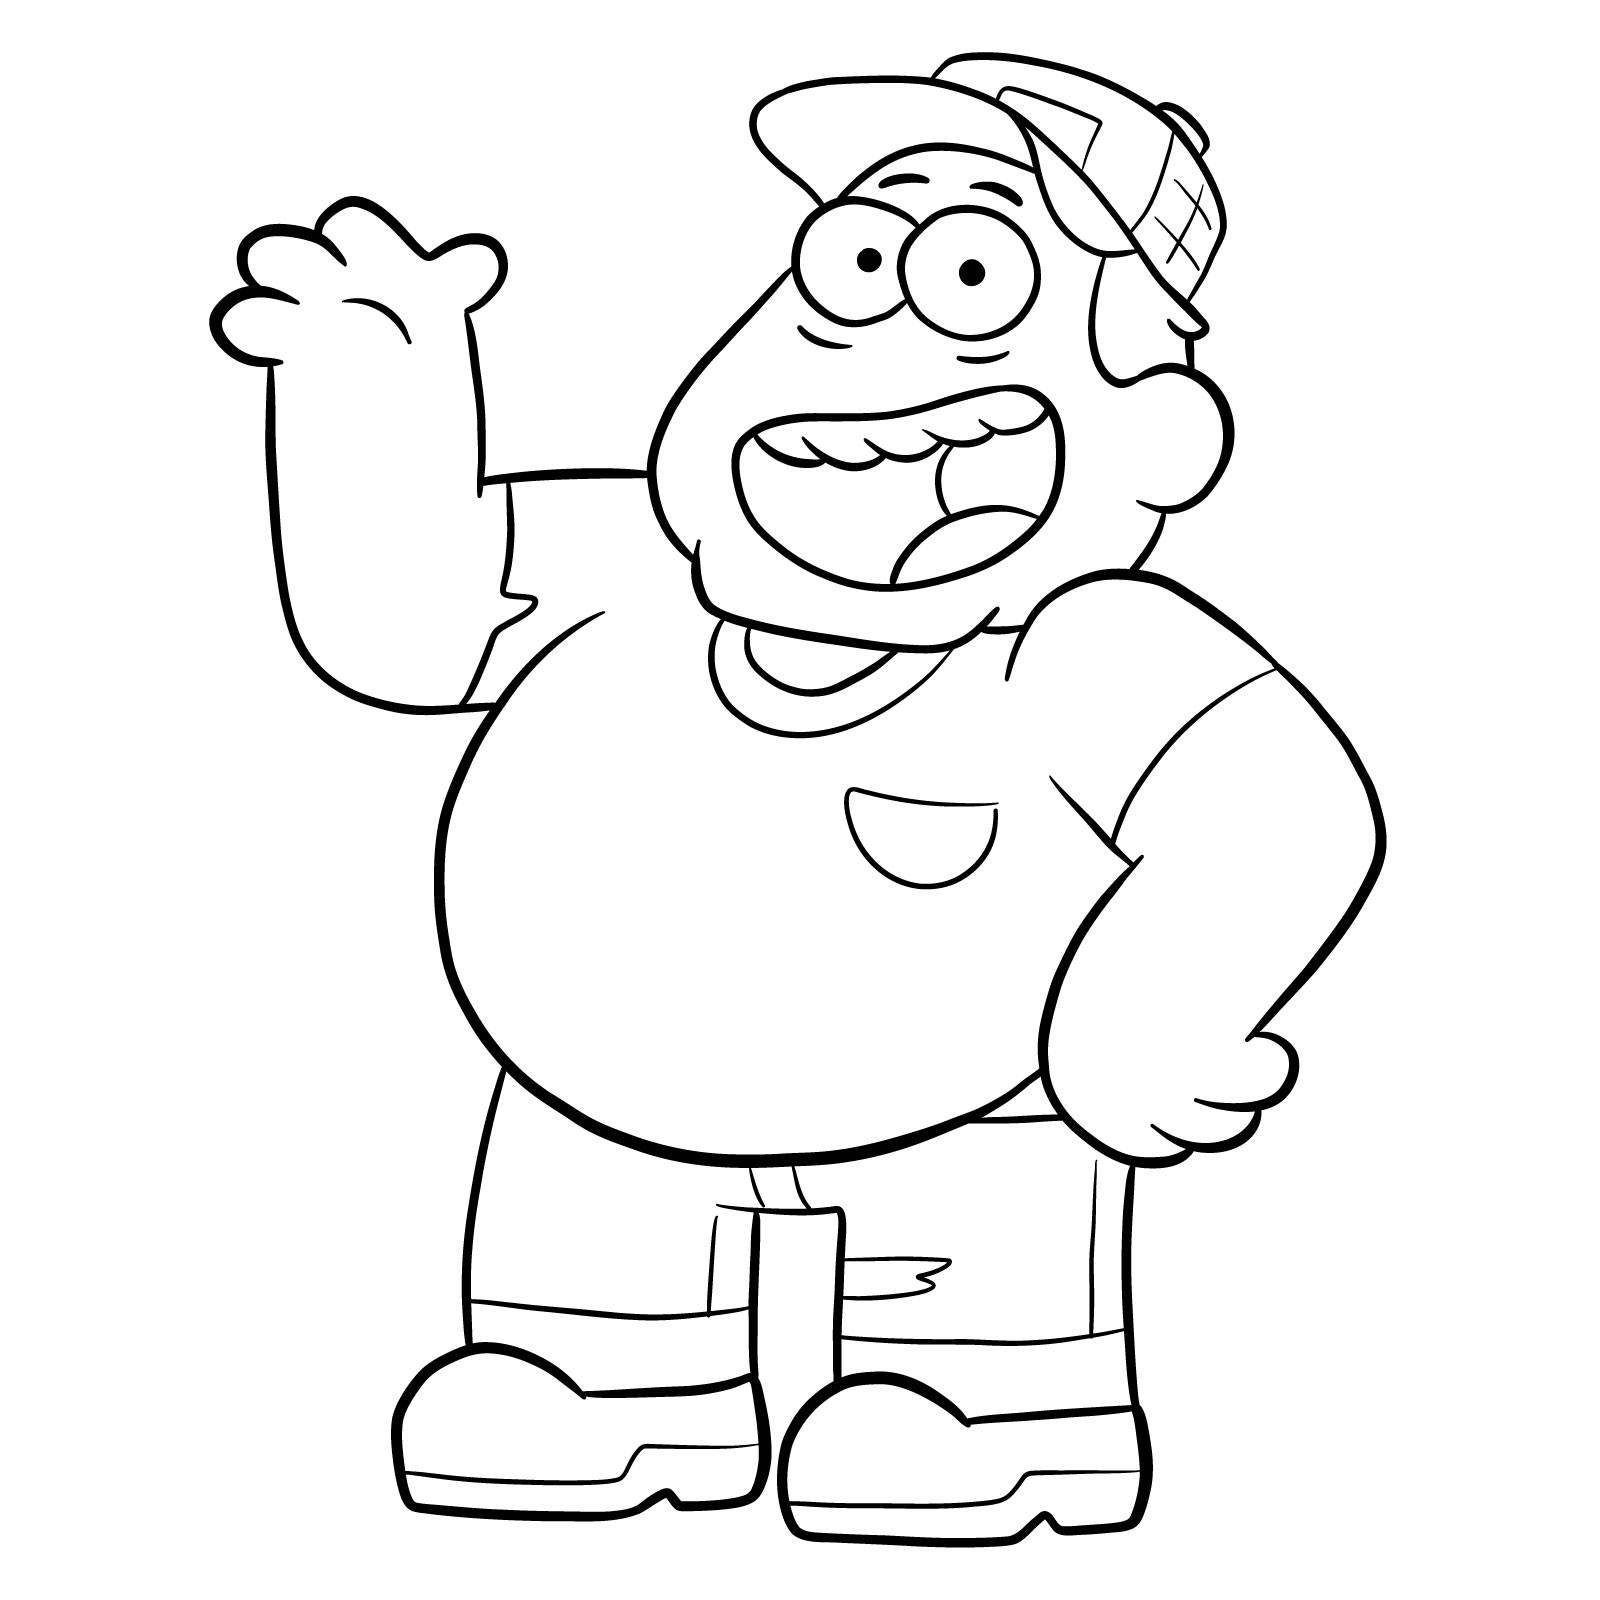 How to draw Bill Green from Big City Greens - final step